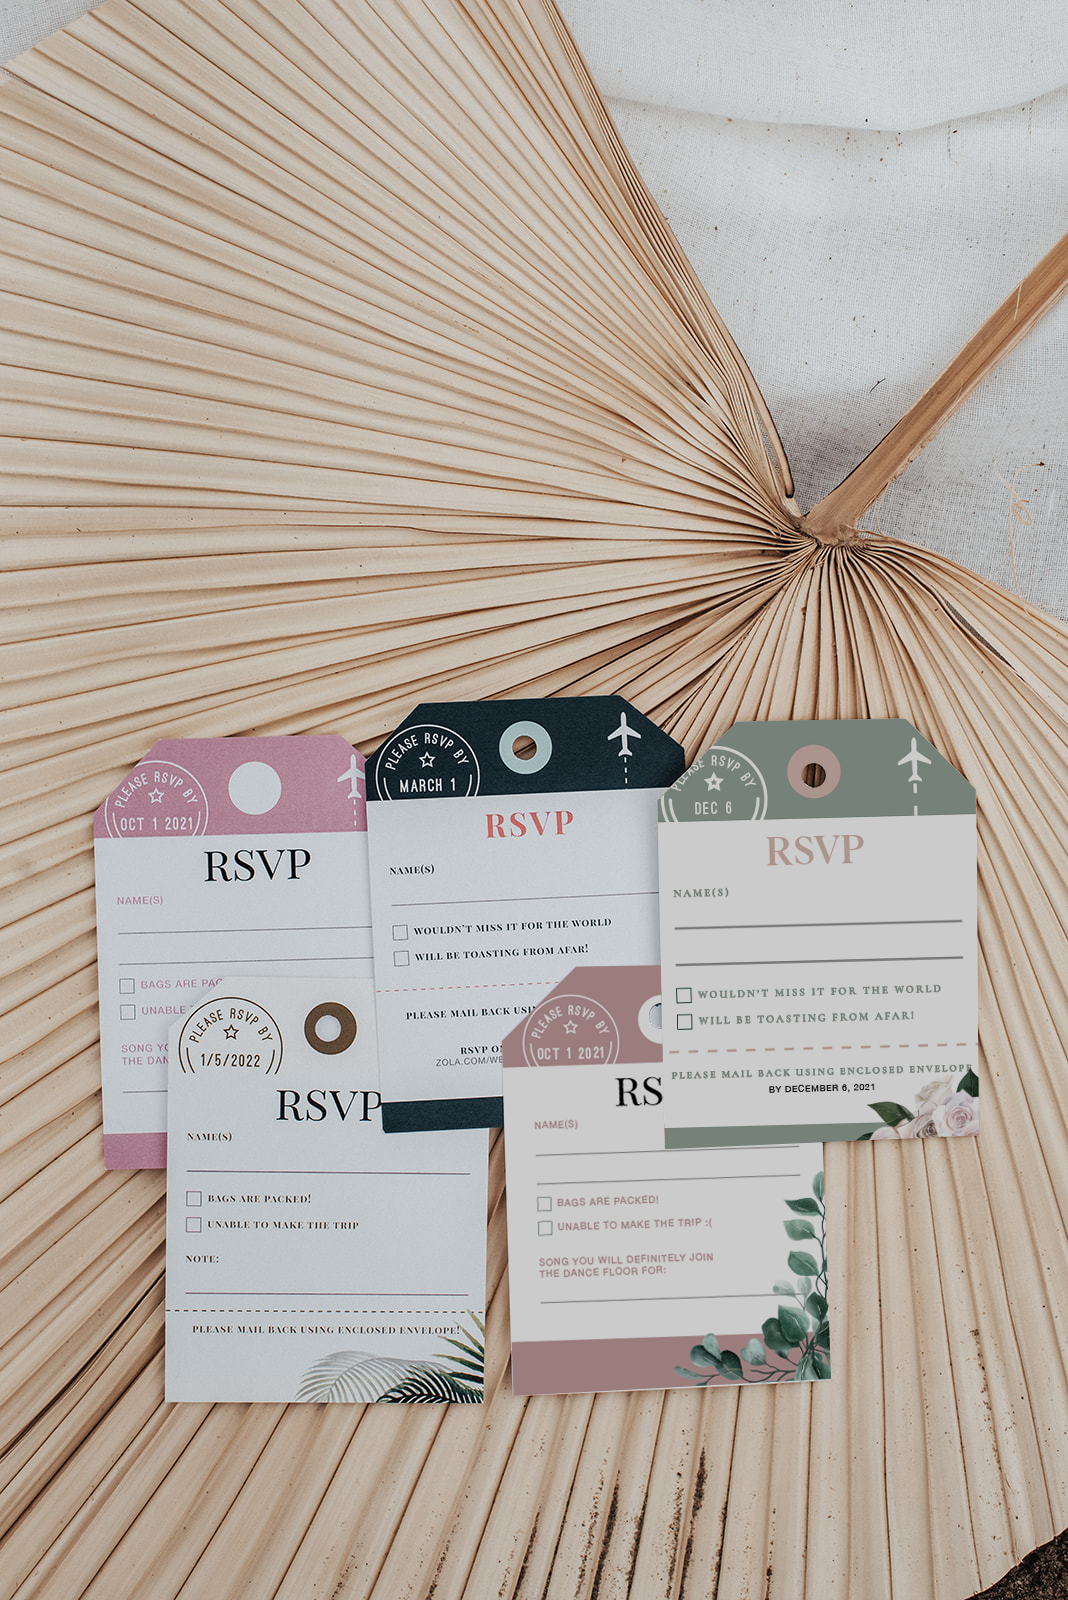 RSVP Luggage Tag (Mail Back)